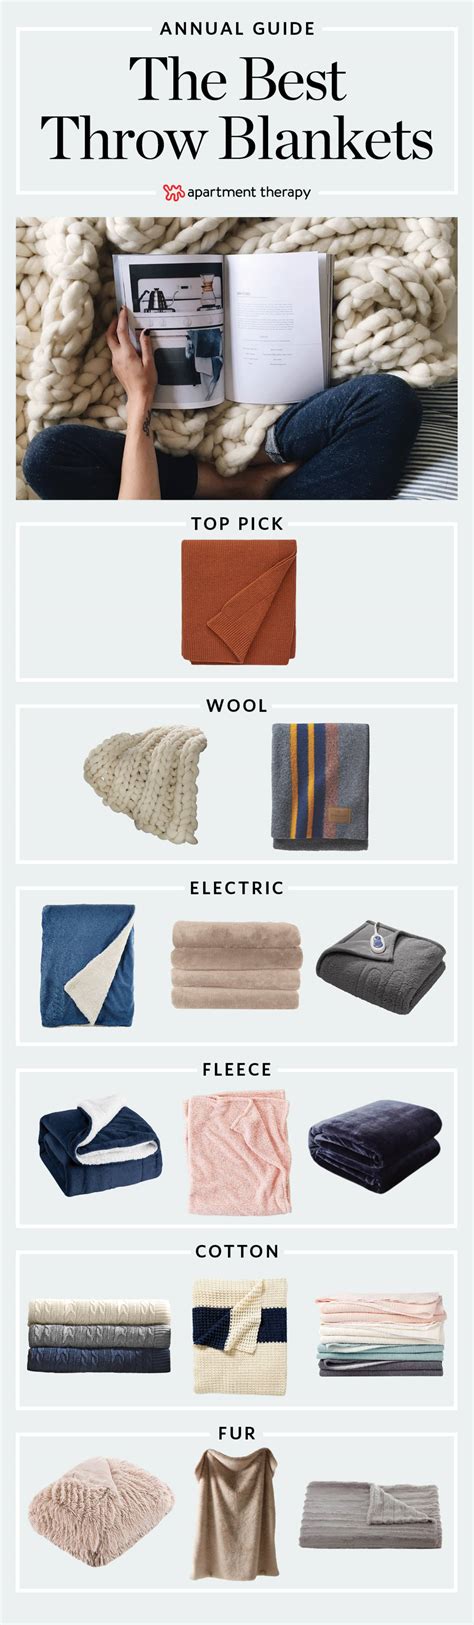 The Best Throw Blankets 2018 Top Rated Picks Apartment Therapy